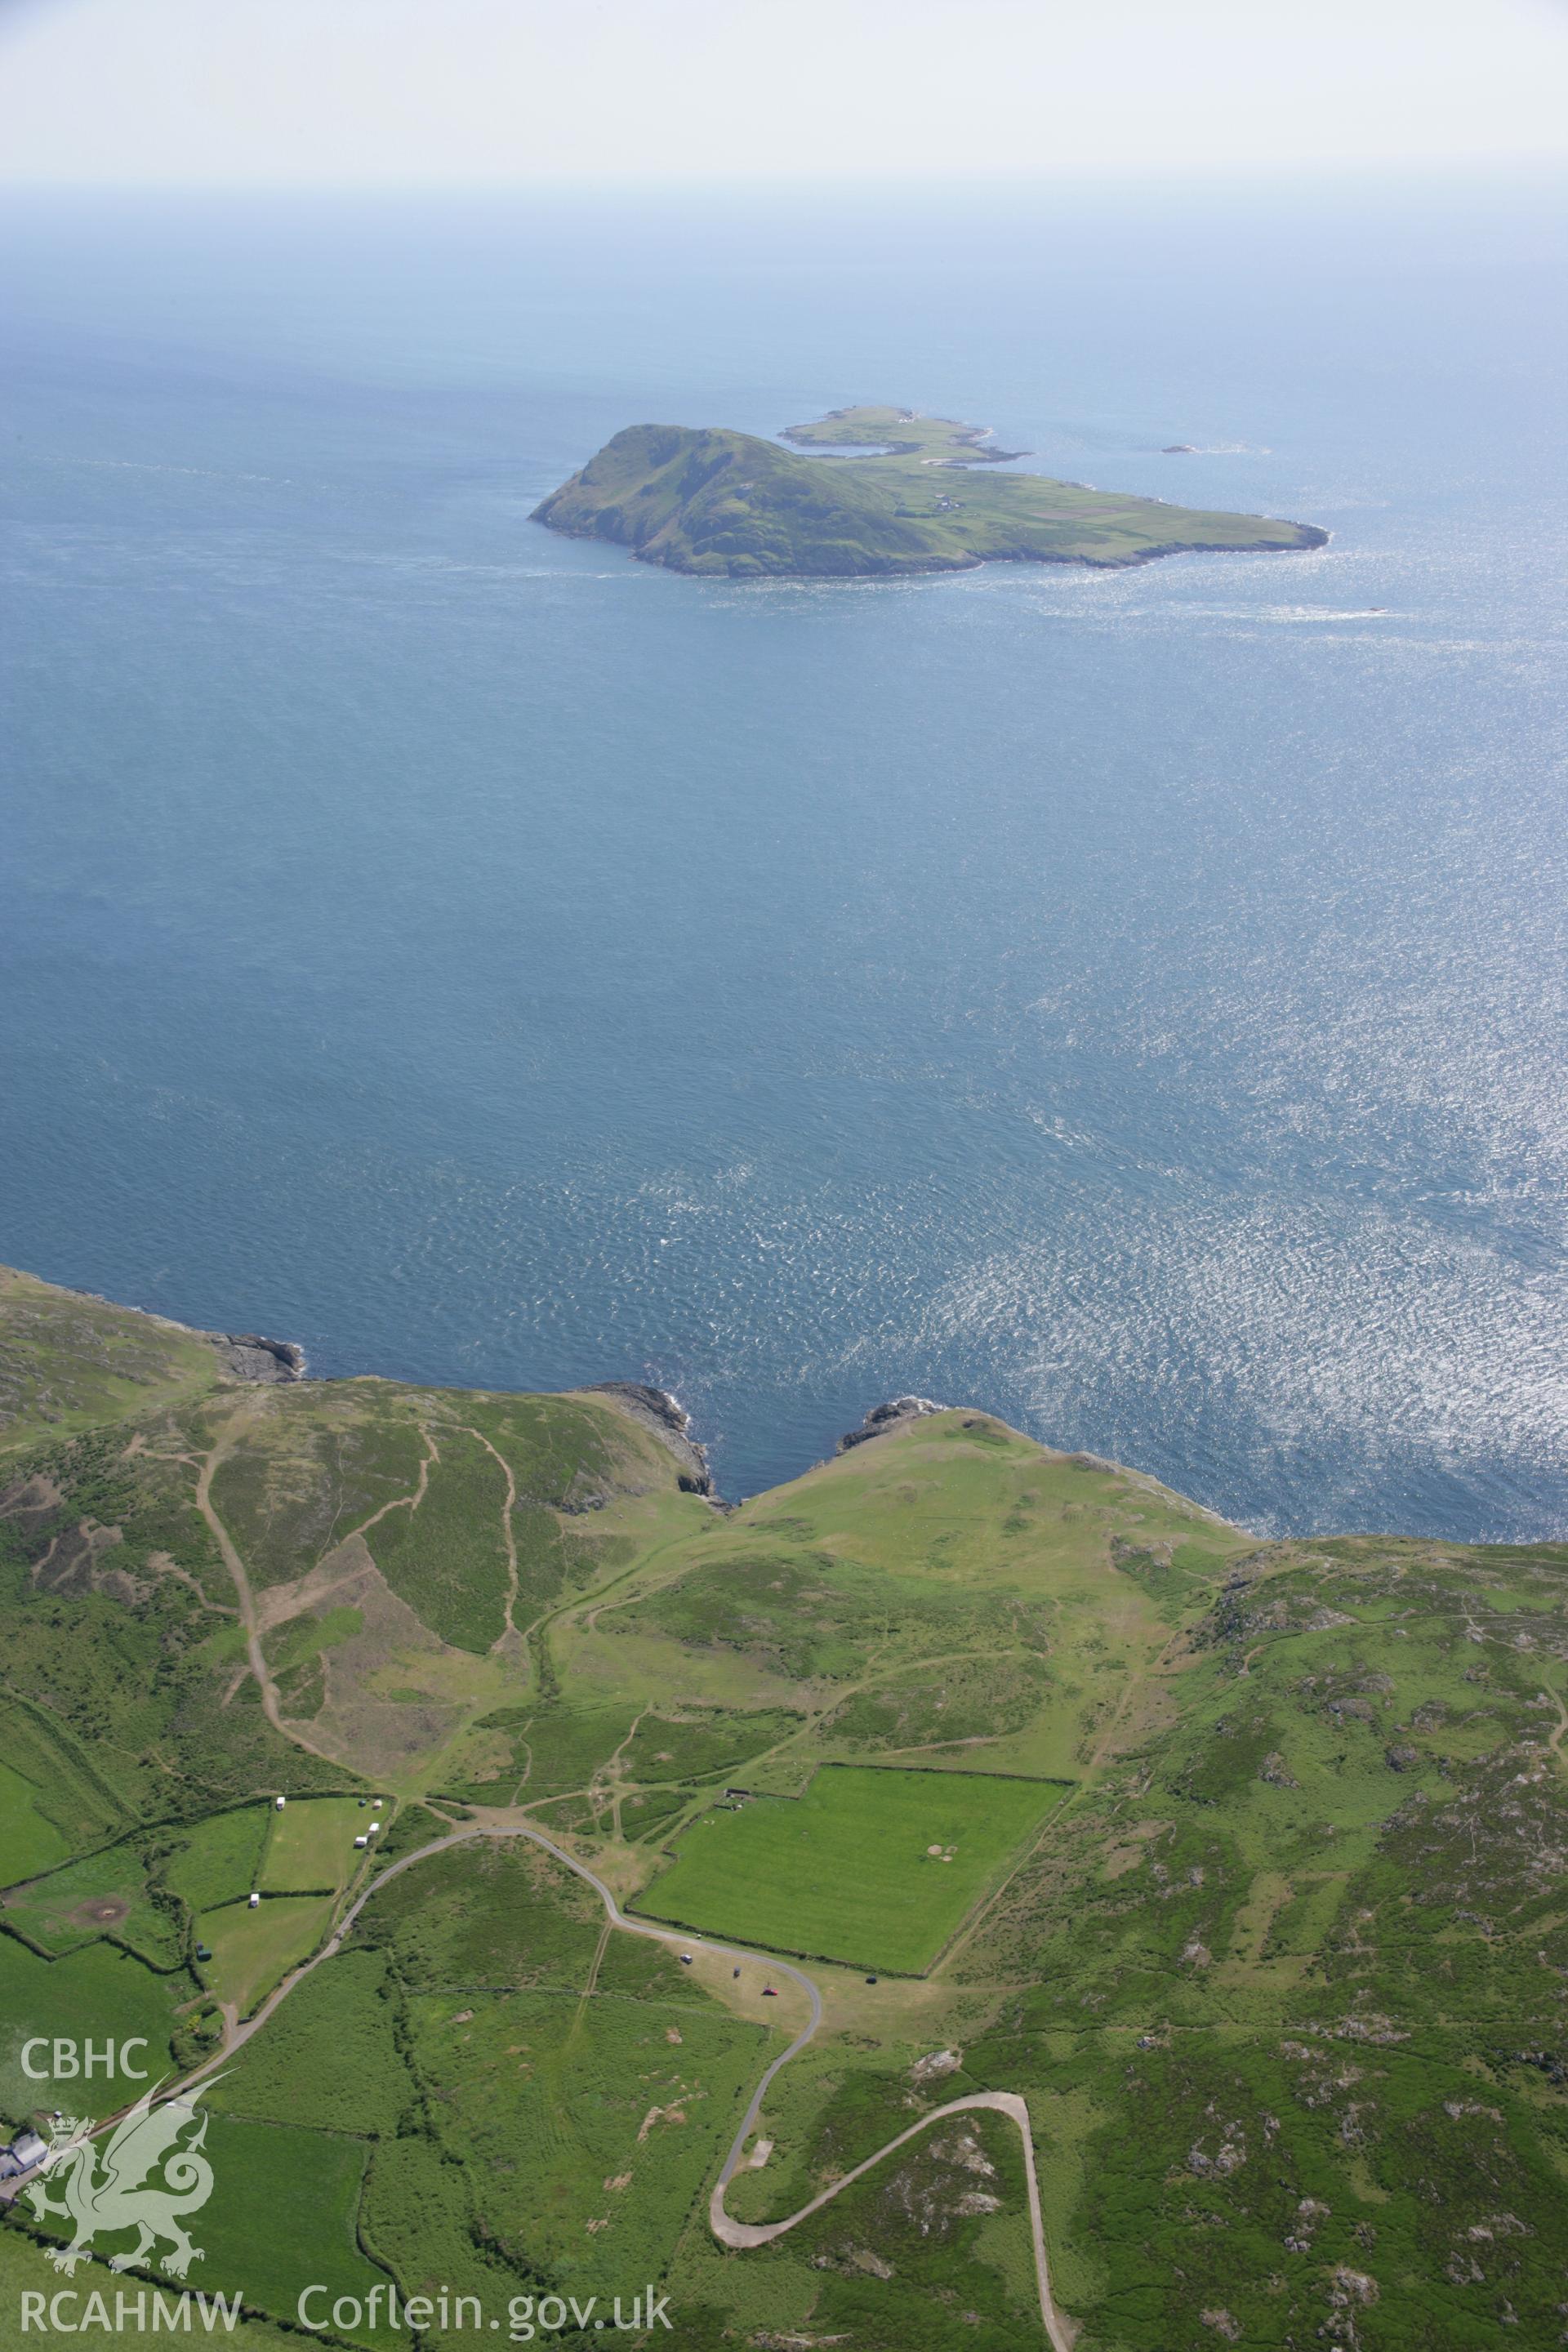 RCAHMW colour oblique aerial photograph of Bardsey Island (Ynys Enlli) from the north-east. Taken on 14 June 2006 by Toby Driver.